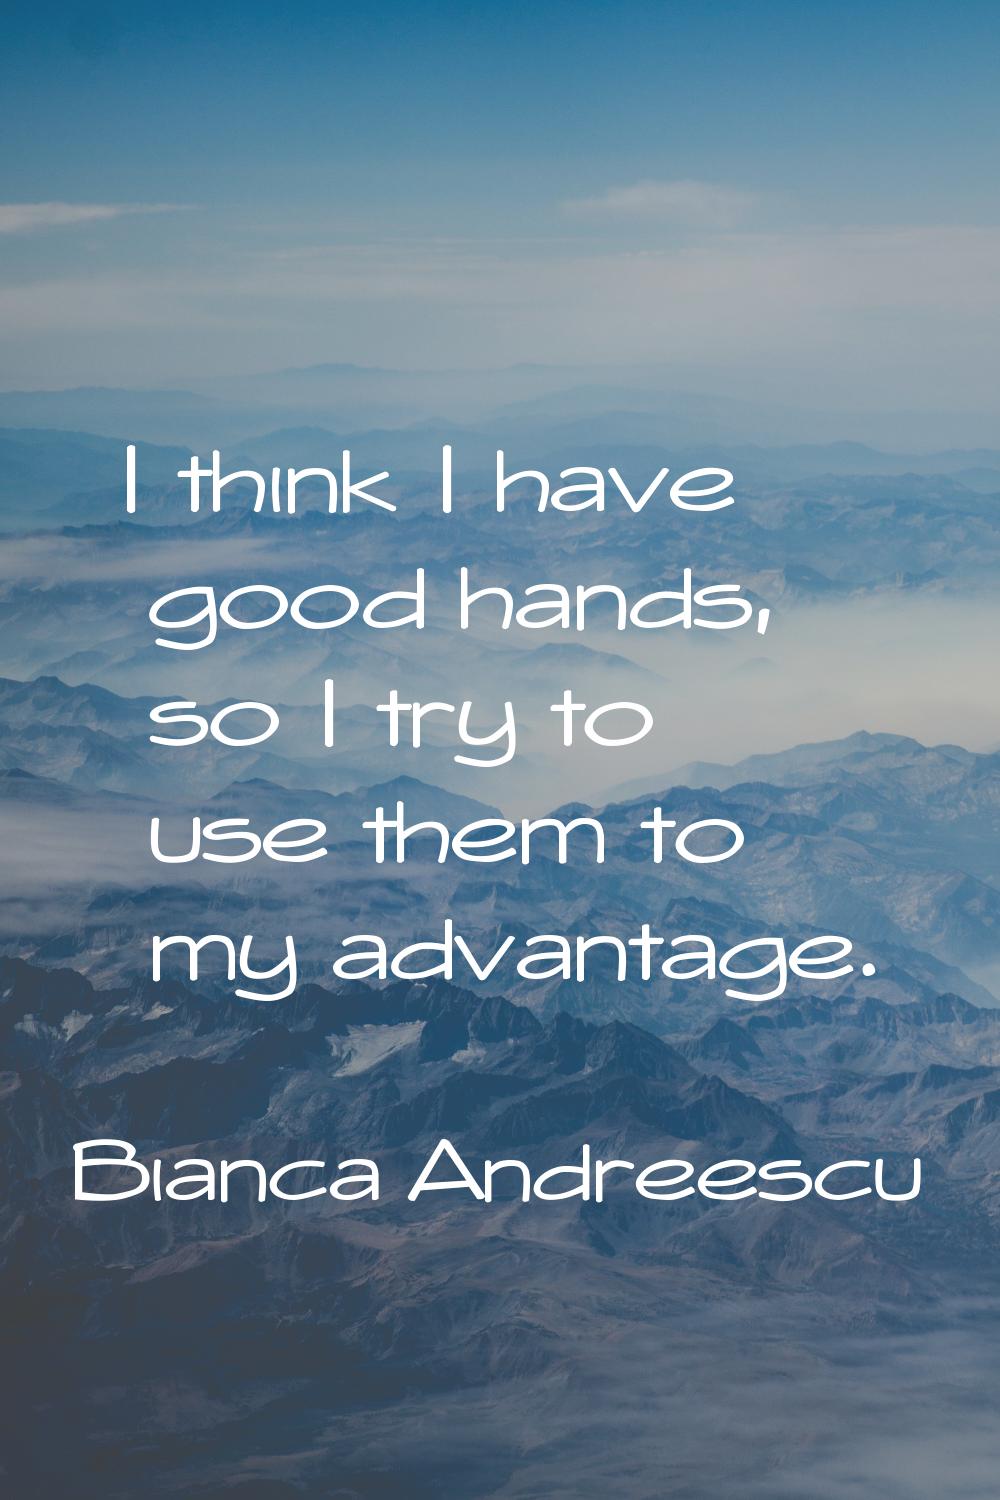 I think I have good hands, so I try to use them to my advantage.